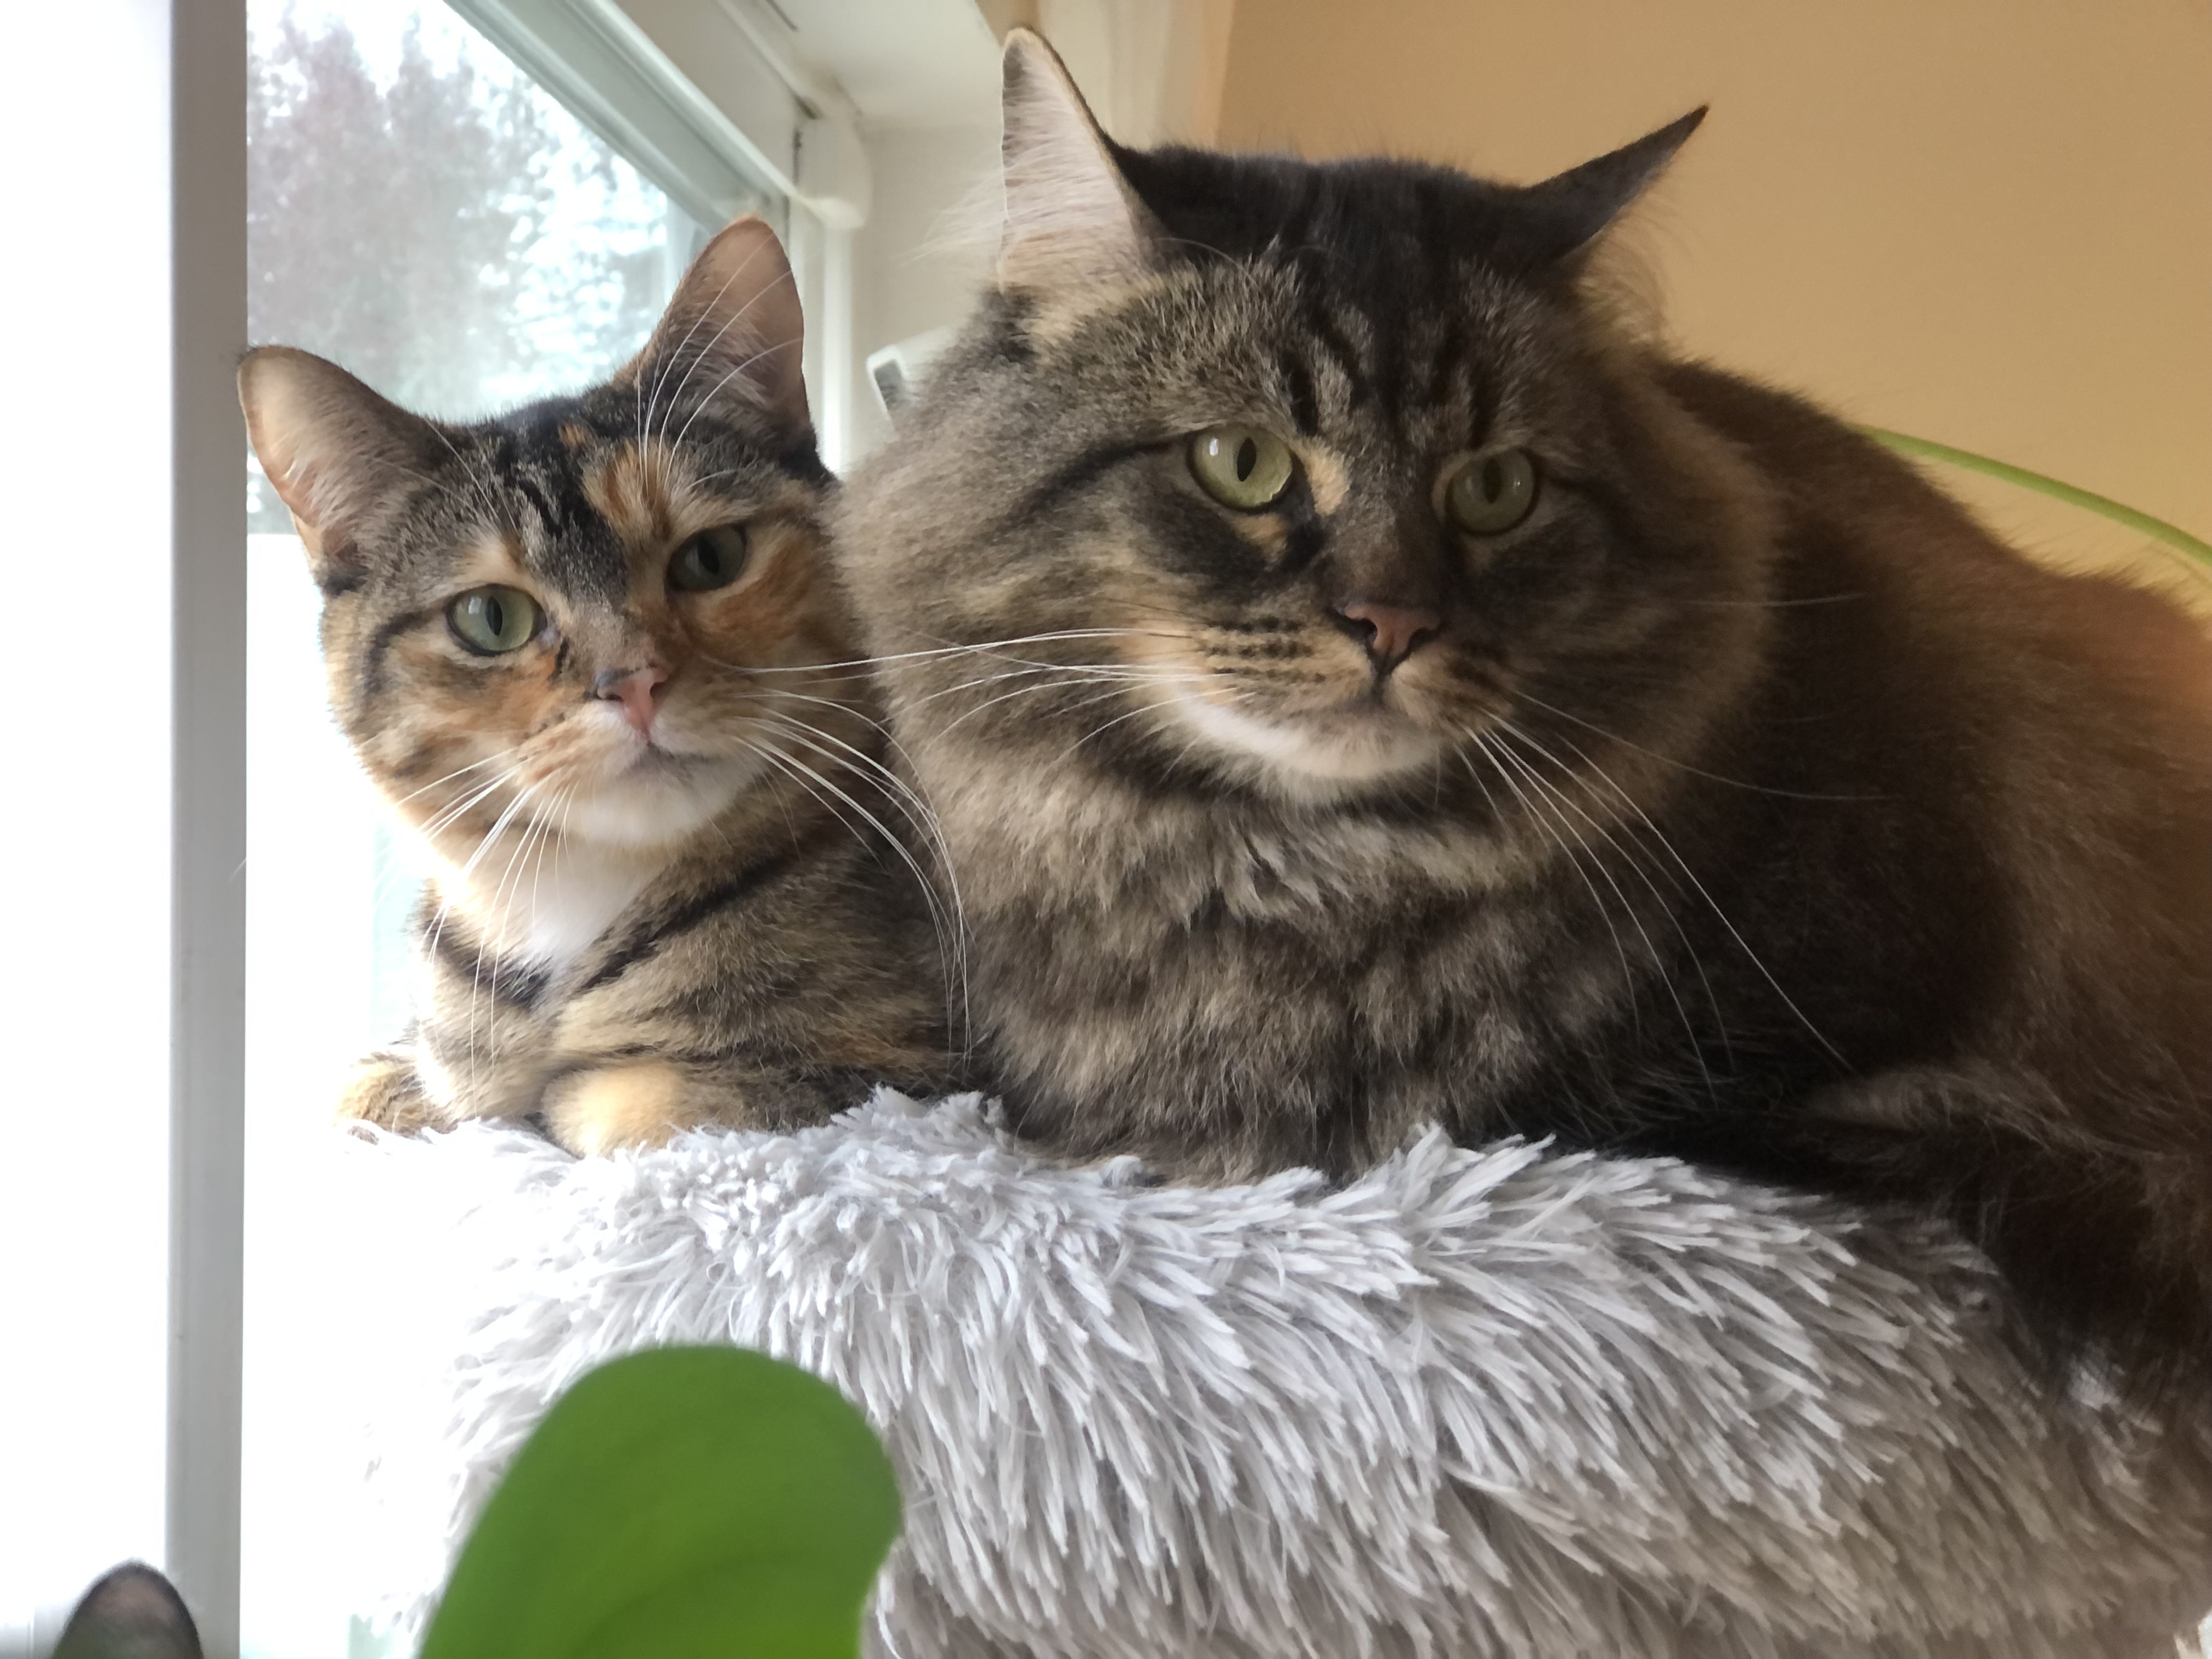 a picture of Link and Leeloo a cat that needs a foster home.